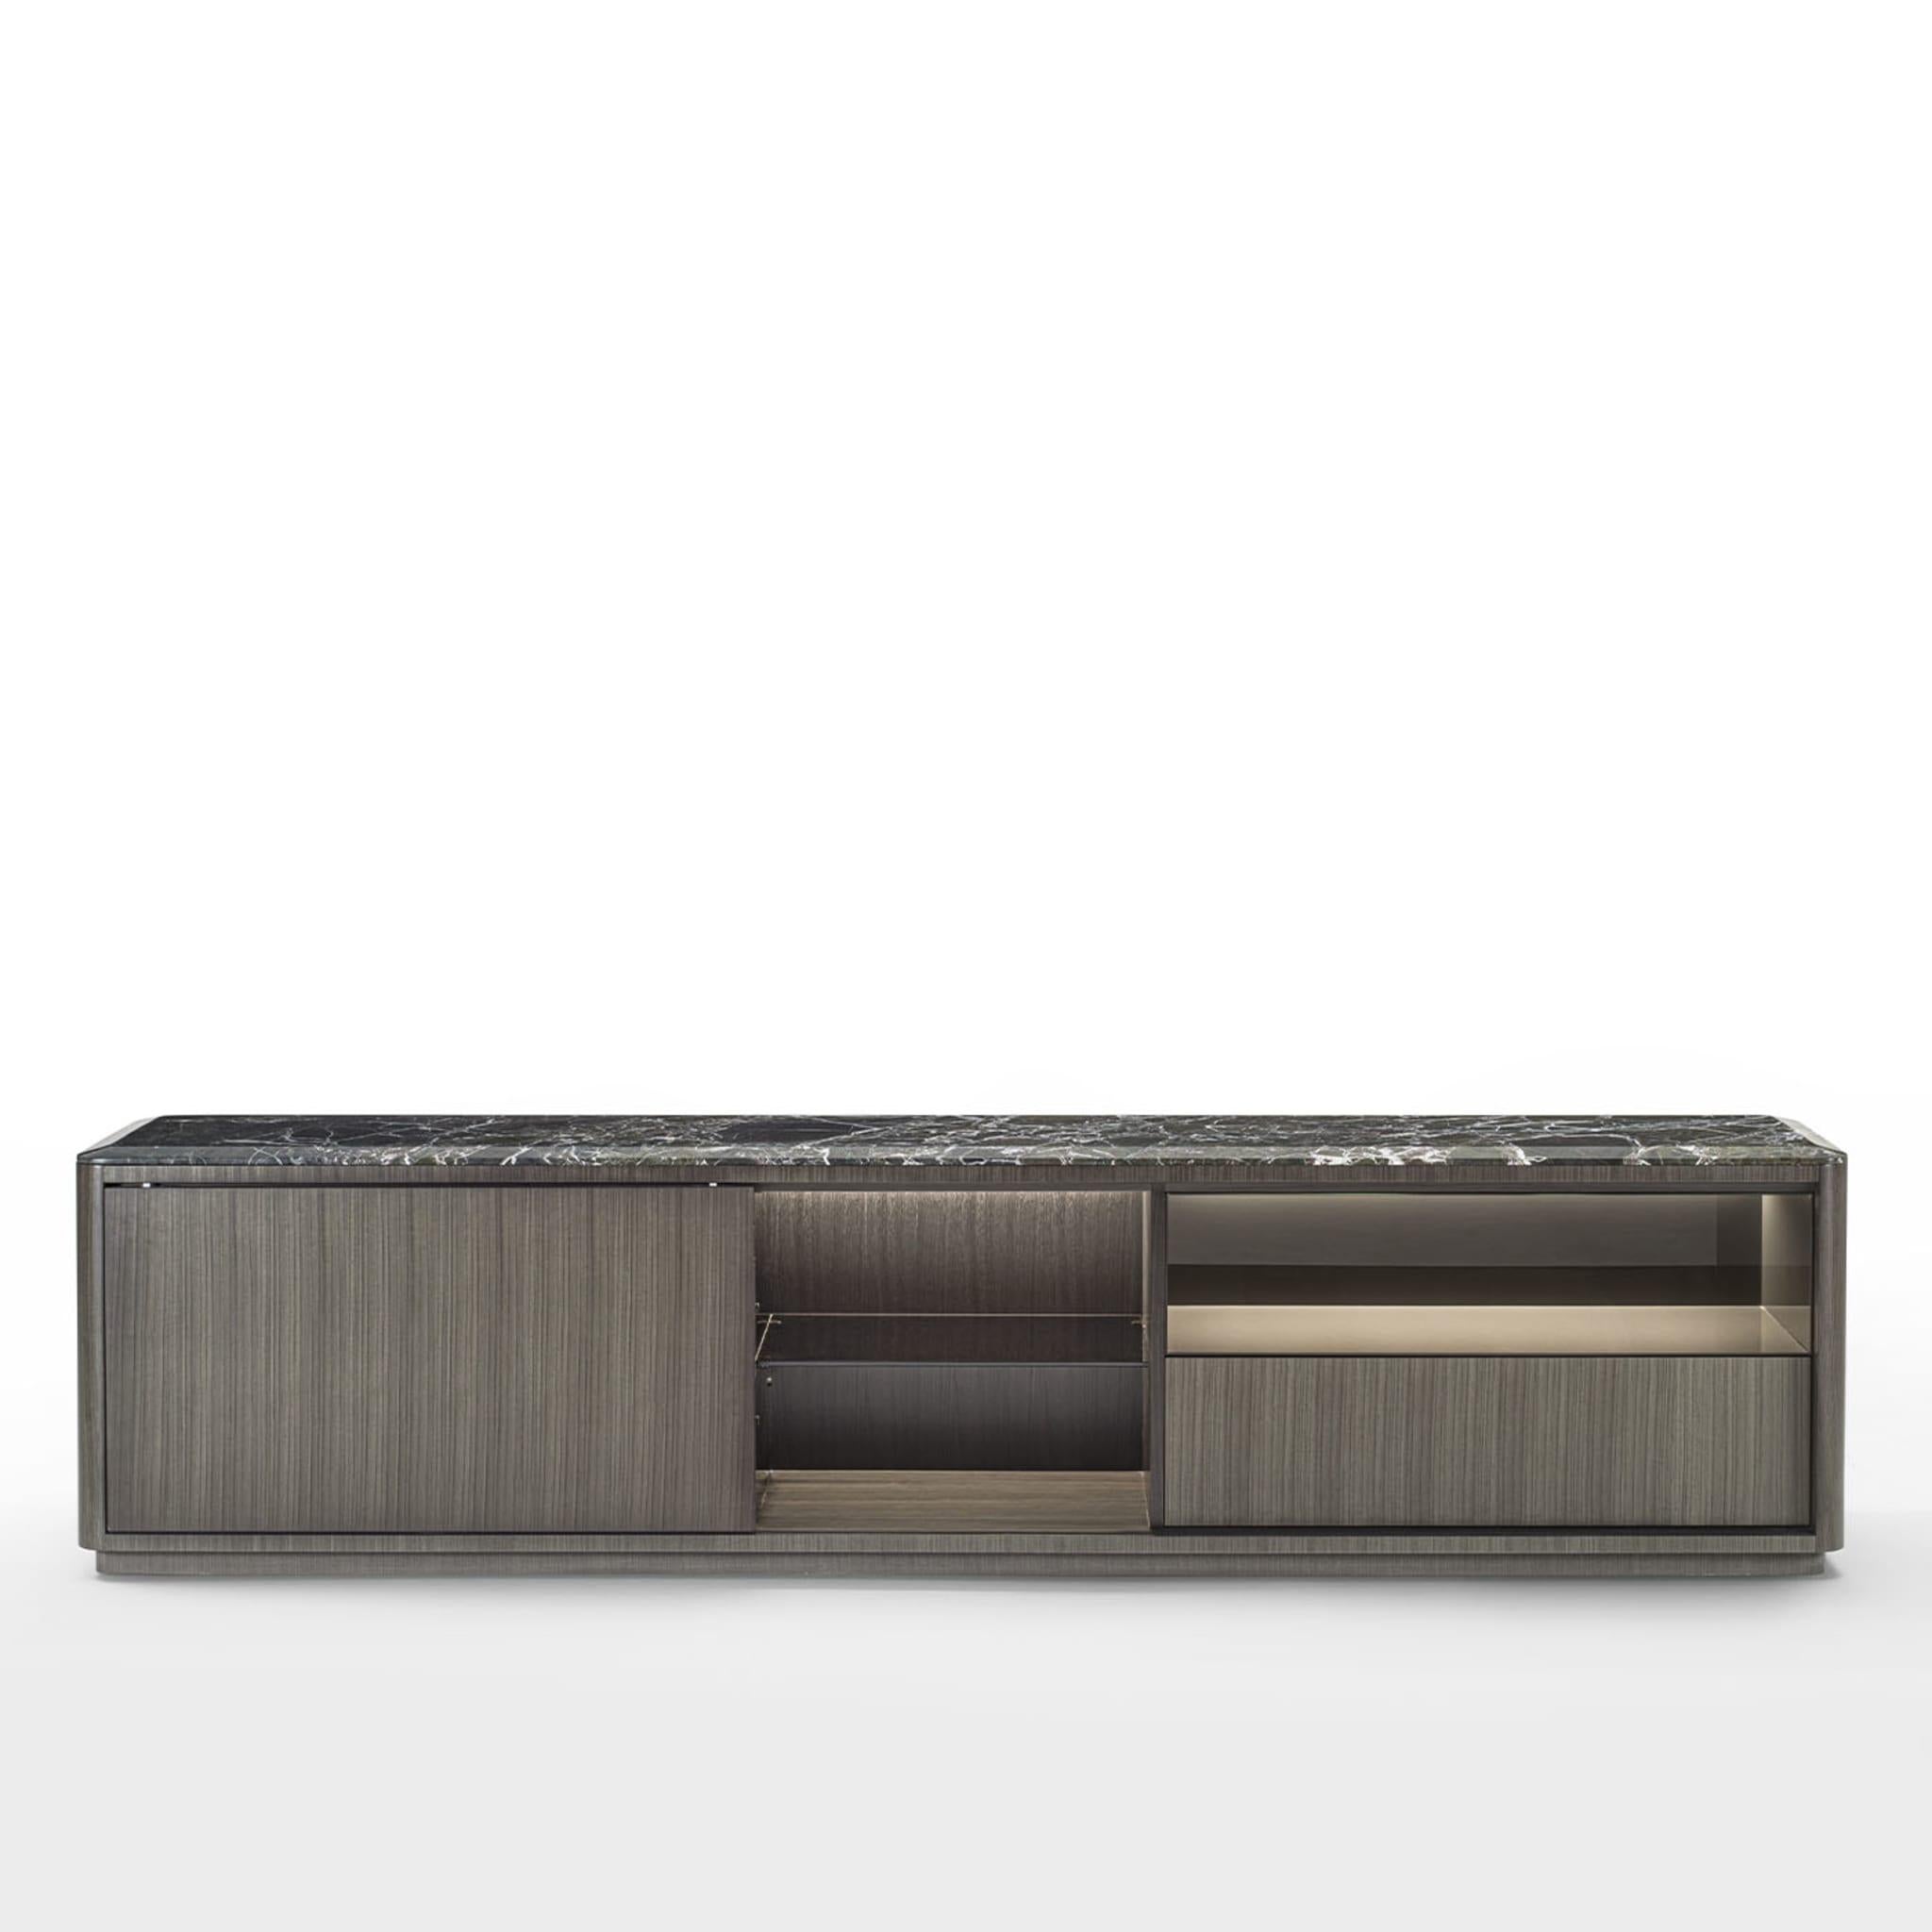 Sideboard characterized by a linear design, embellished by the structure covered in dark Tay and by the detail of the rounded corners. The sliding door creates multiple compositions with open compartments and drawers. The internal structure of the